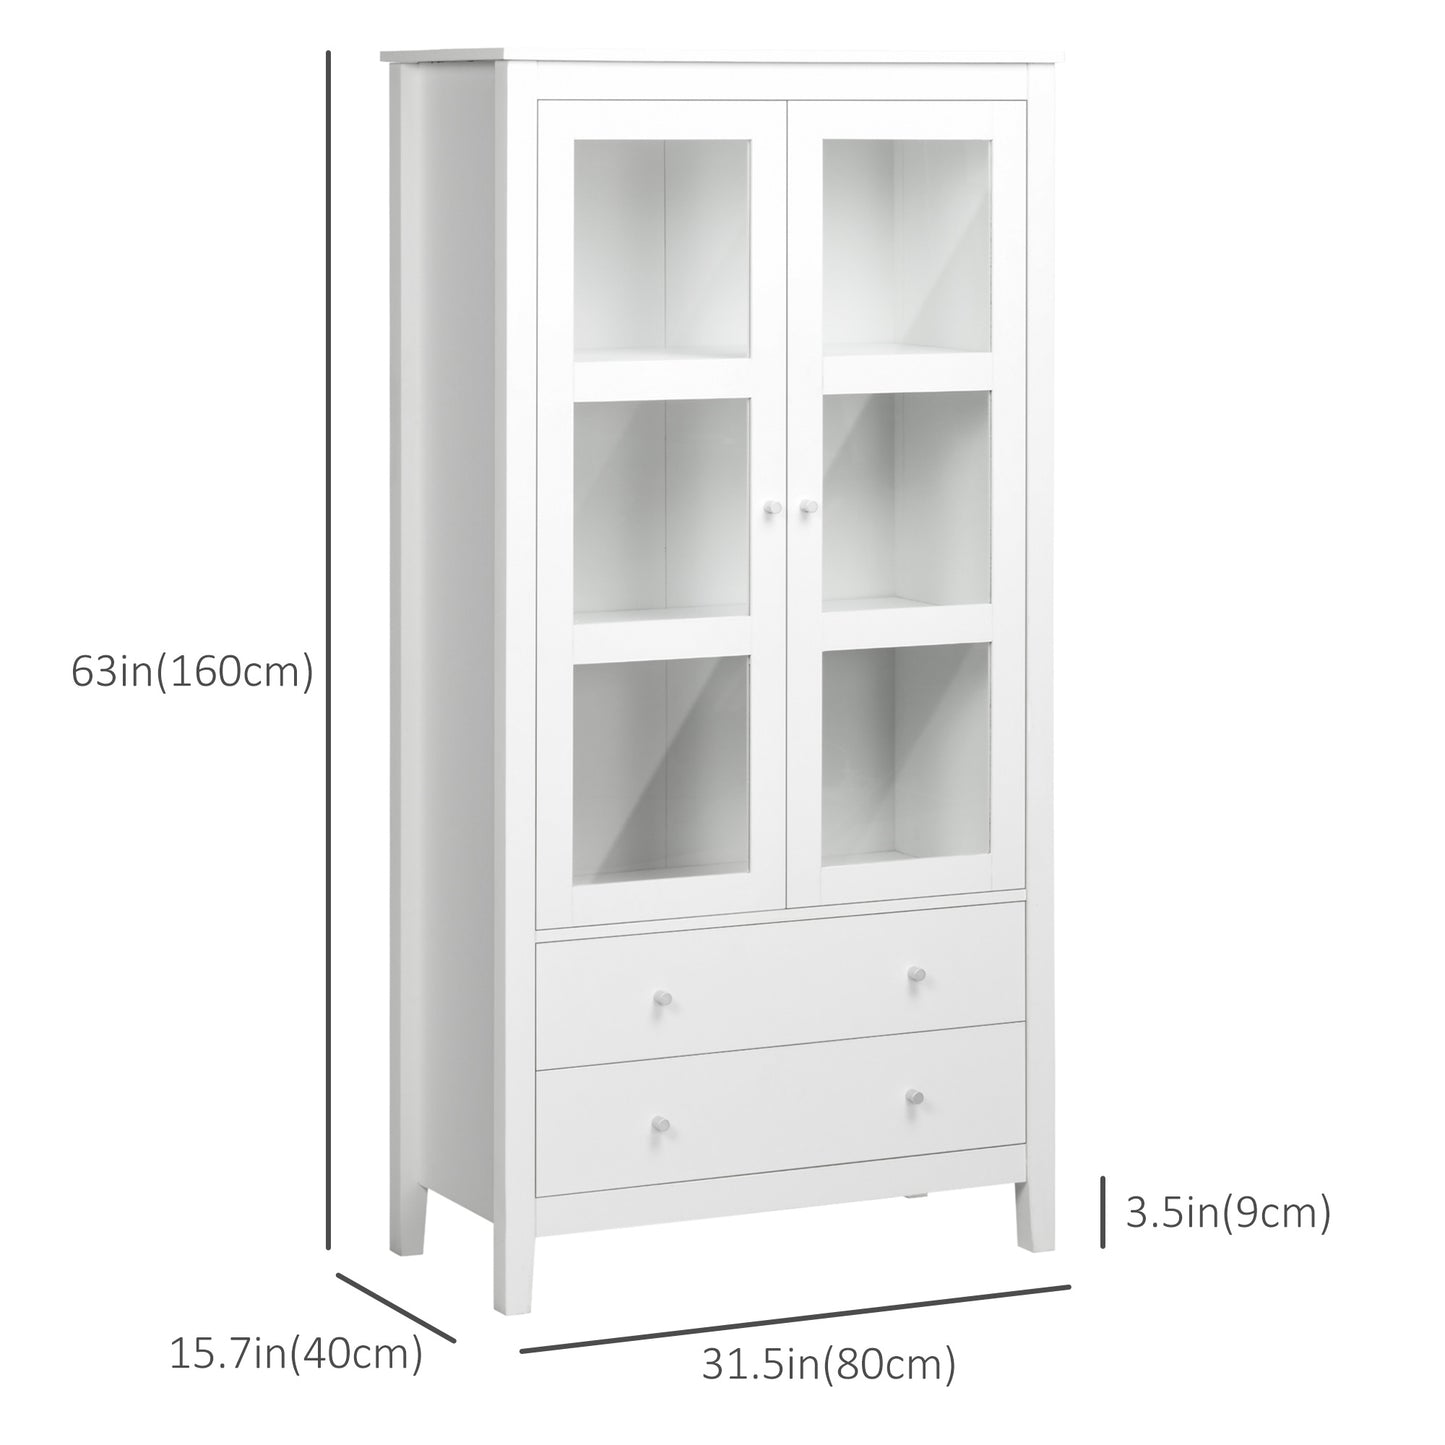 Kitchen Pantry Cabinet, Freestanding Storage Cabinet with 3-tier Shelves, 2 Drawers and Glass Doors, White